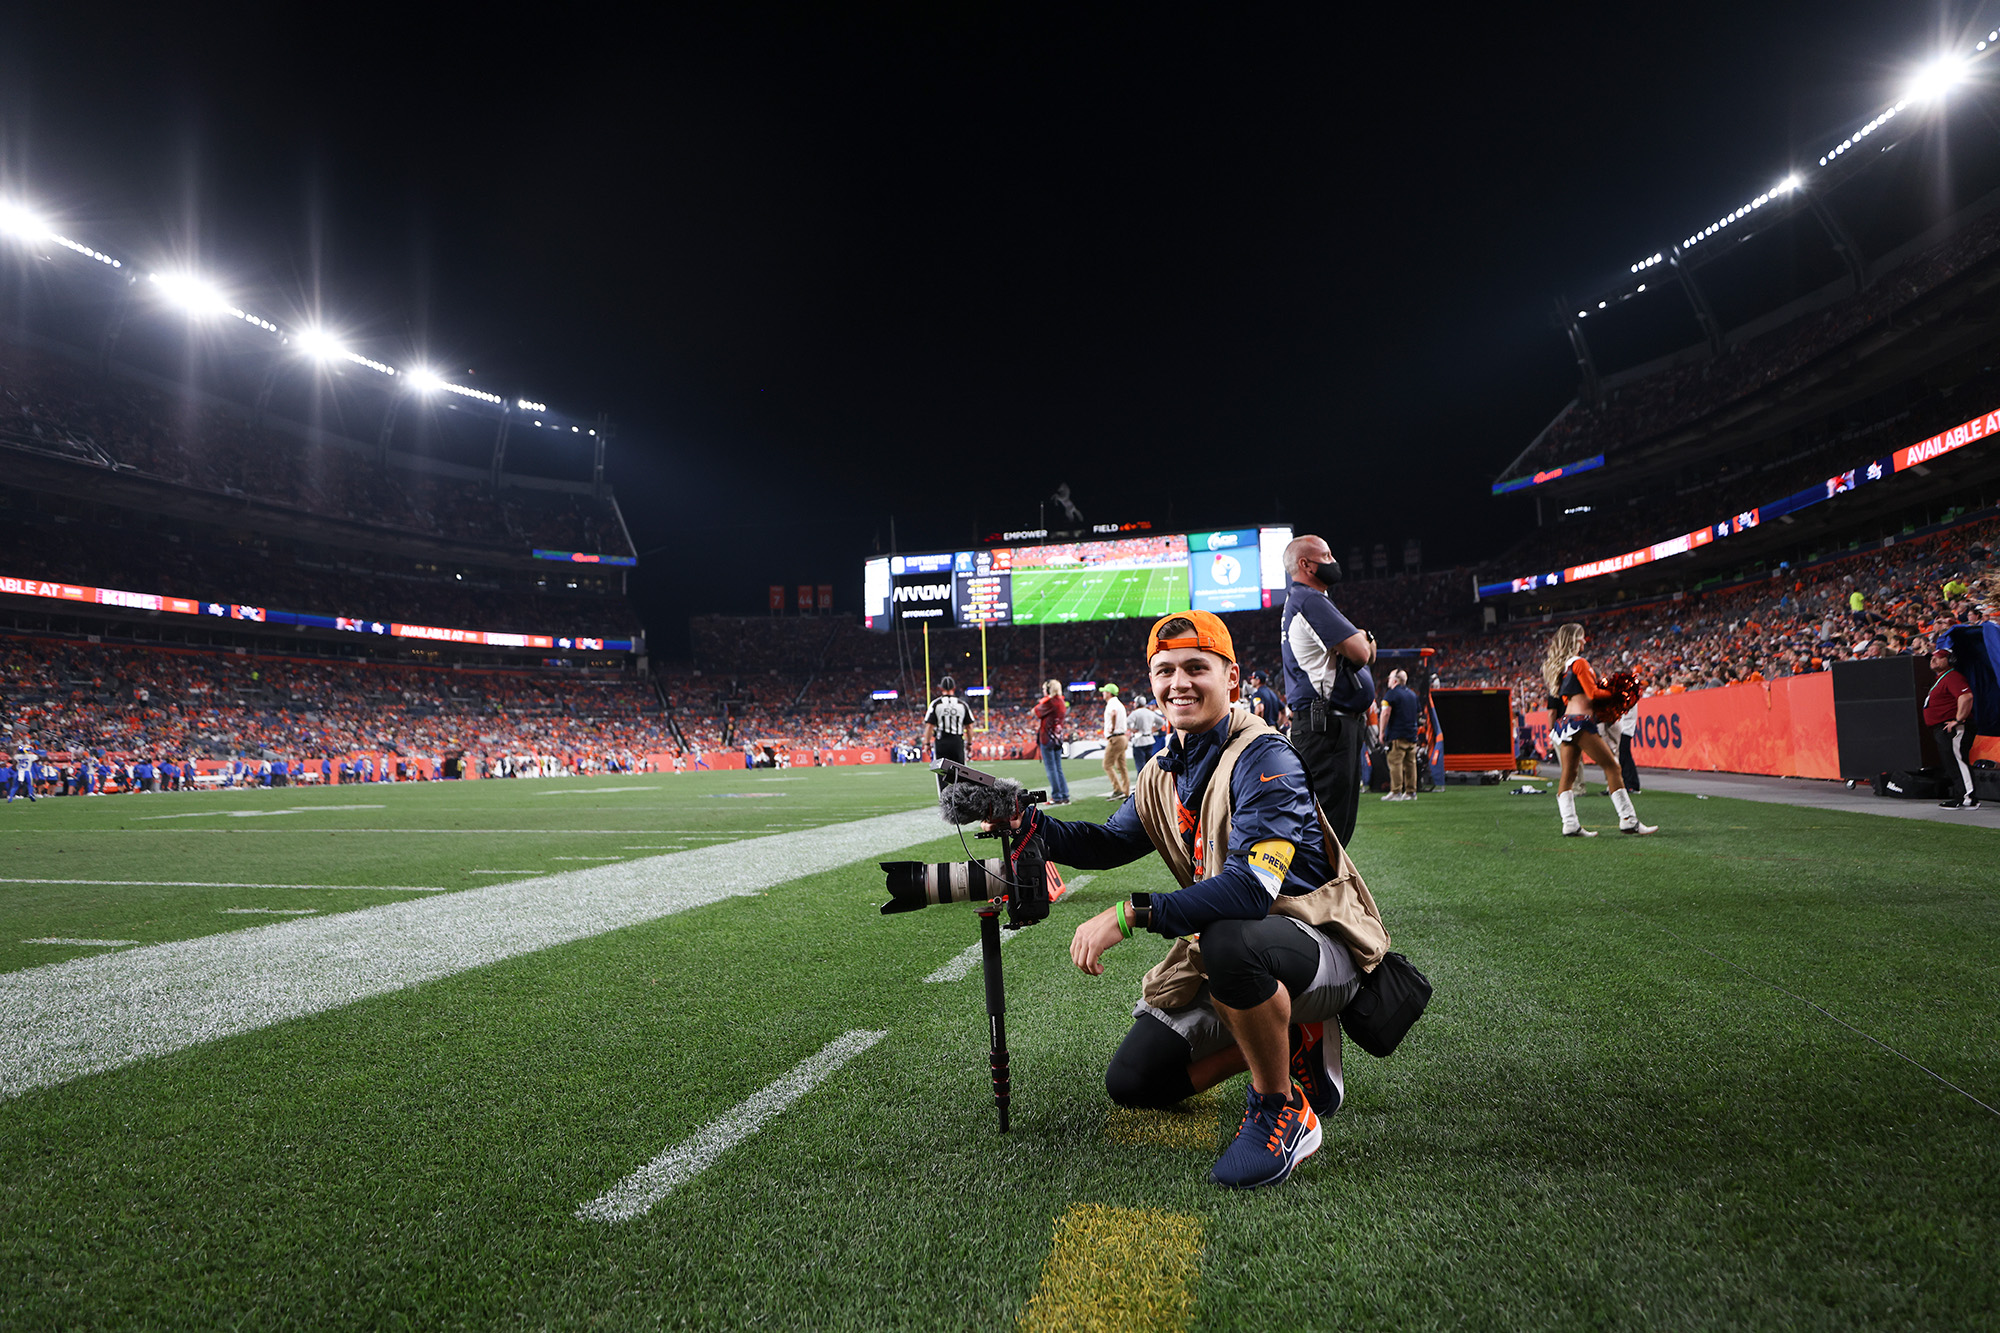 university of iowa alumnus cole cooper holding a camera on the sidelines of a denver broncos game